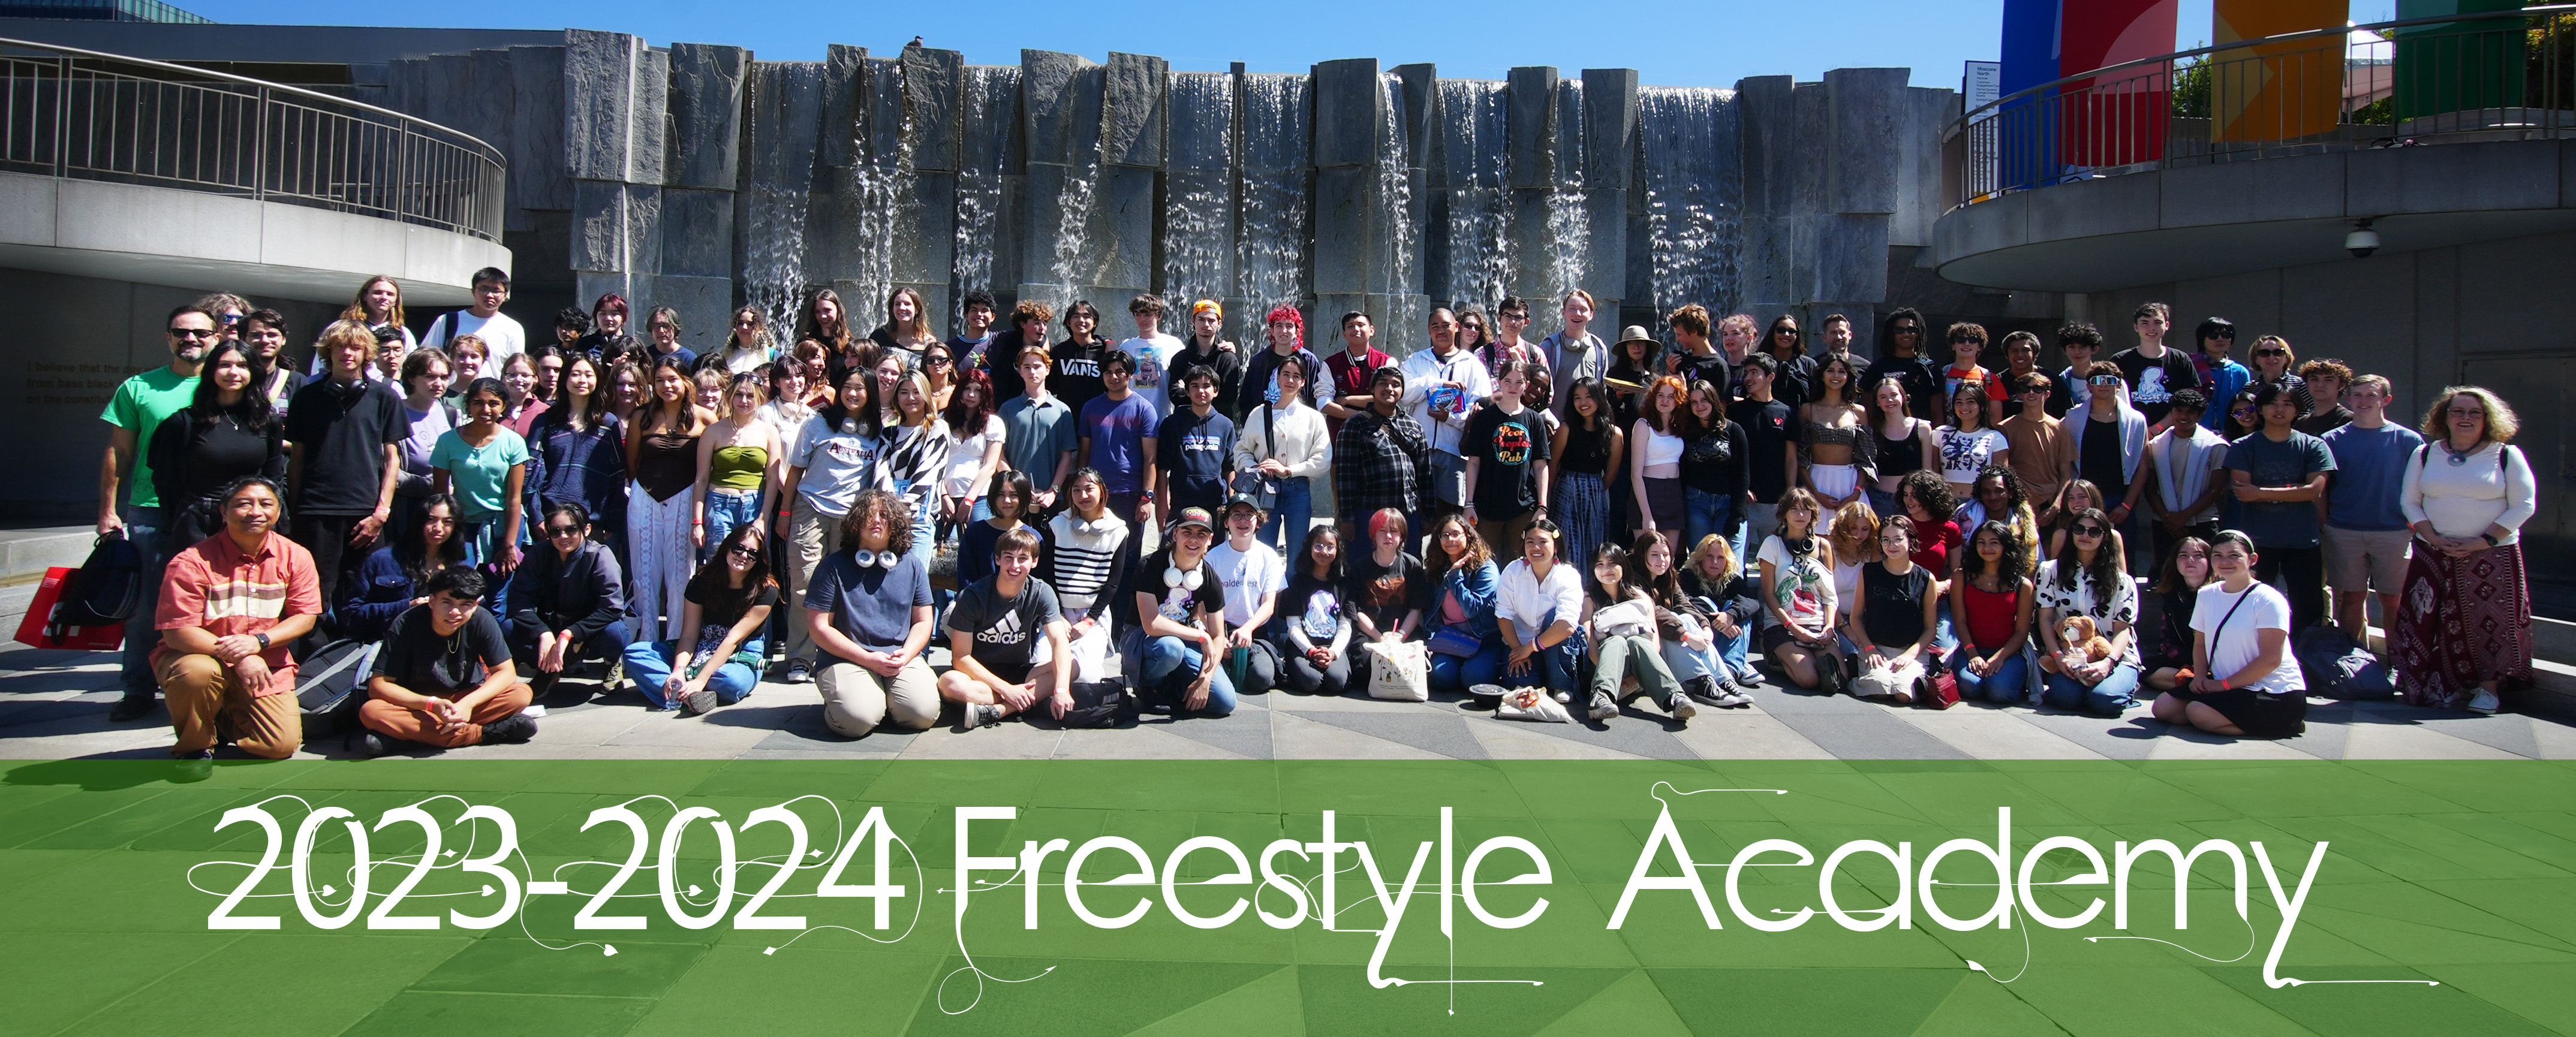 2023-2024 Freestyle Academy Students and Staff